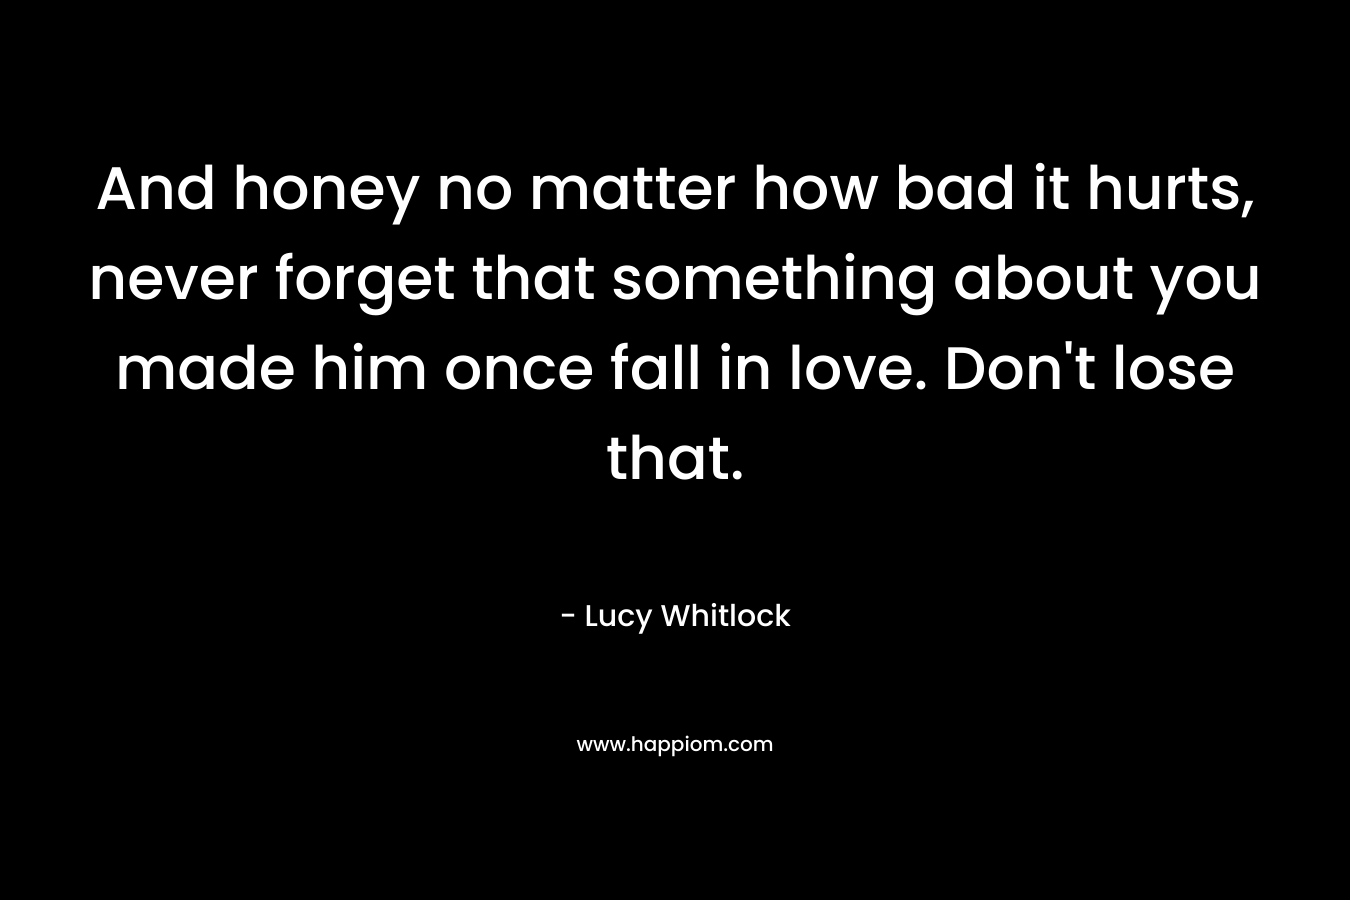 And honey no matter how bad it hurts, never forget that something about you made him once fall in love. Don't lose that.